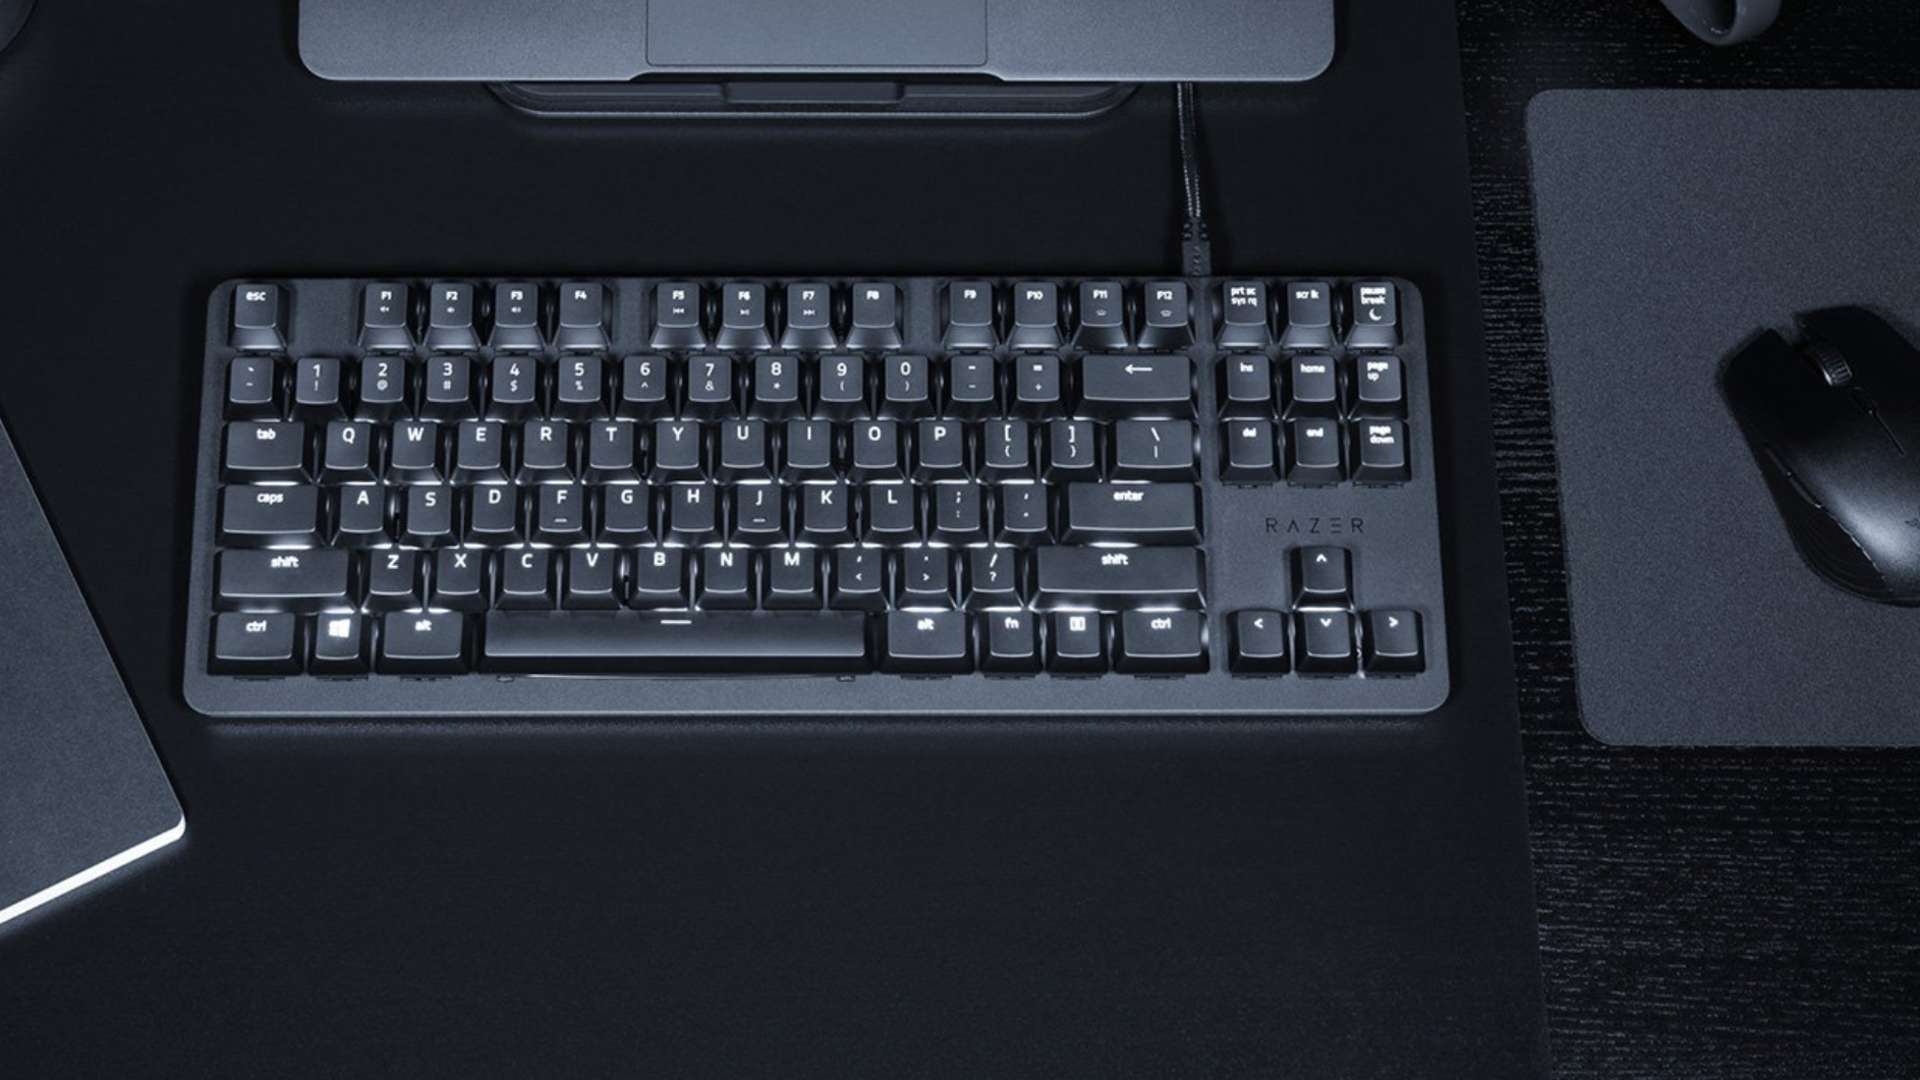 Cool Best Minimalist Gaming Keyboard with Epic Design ideas